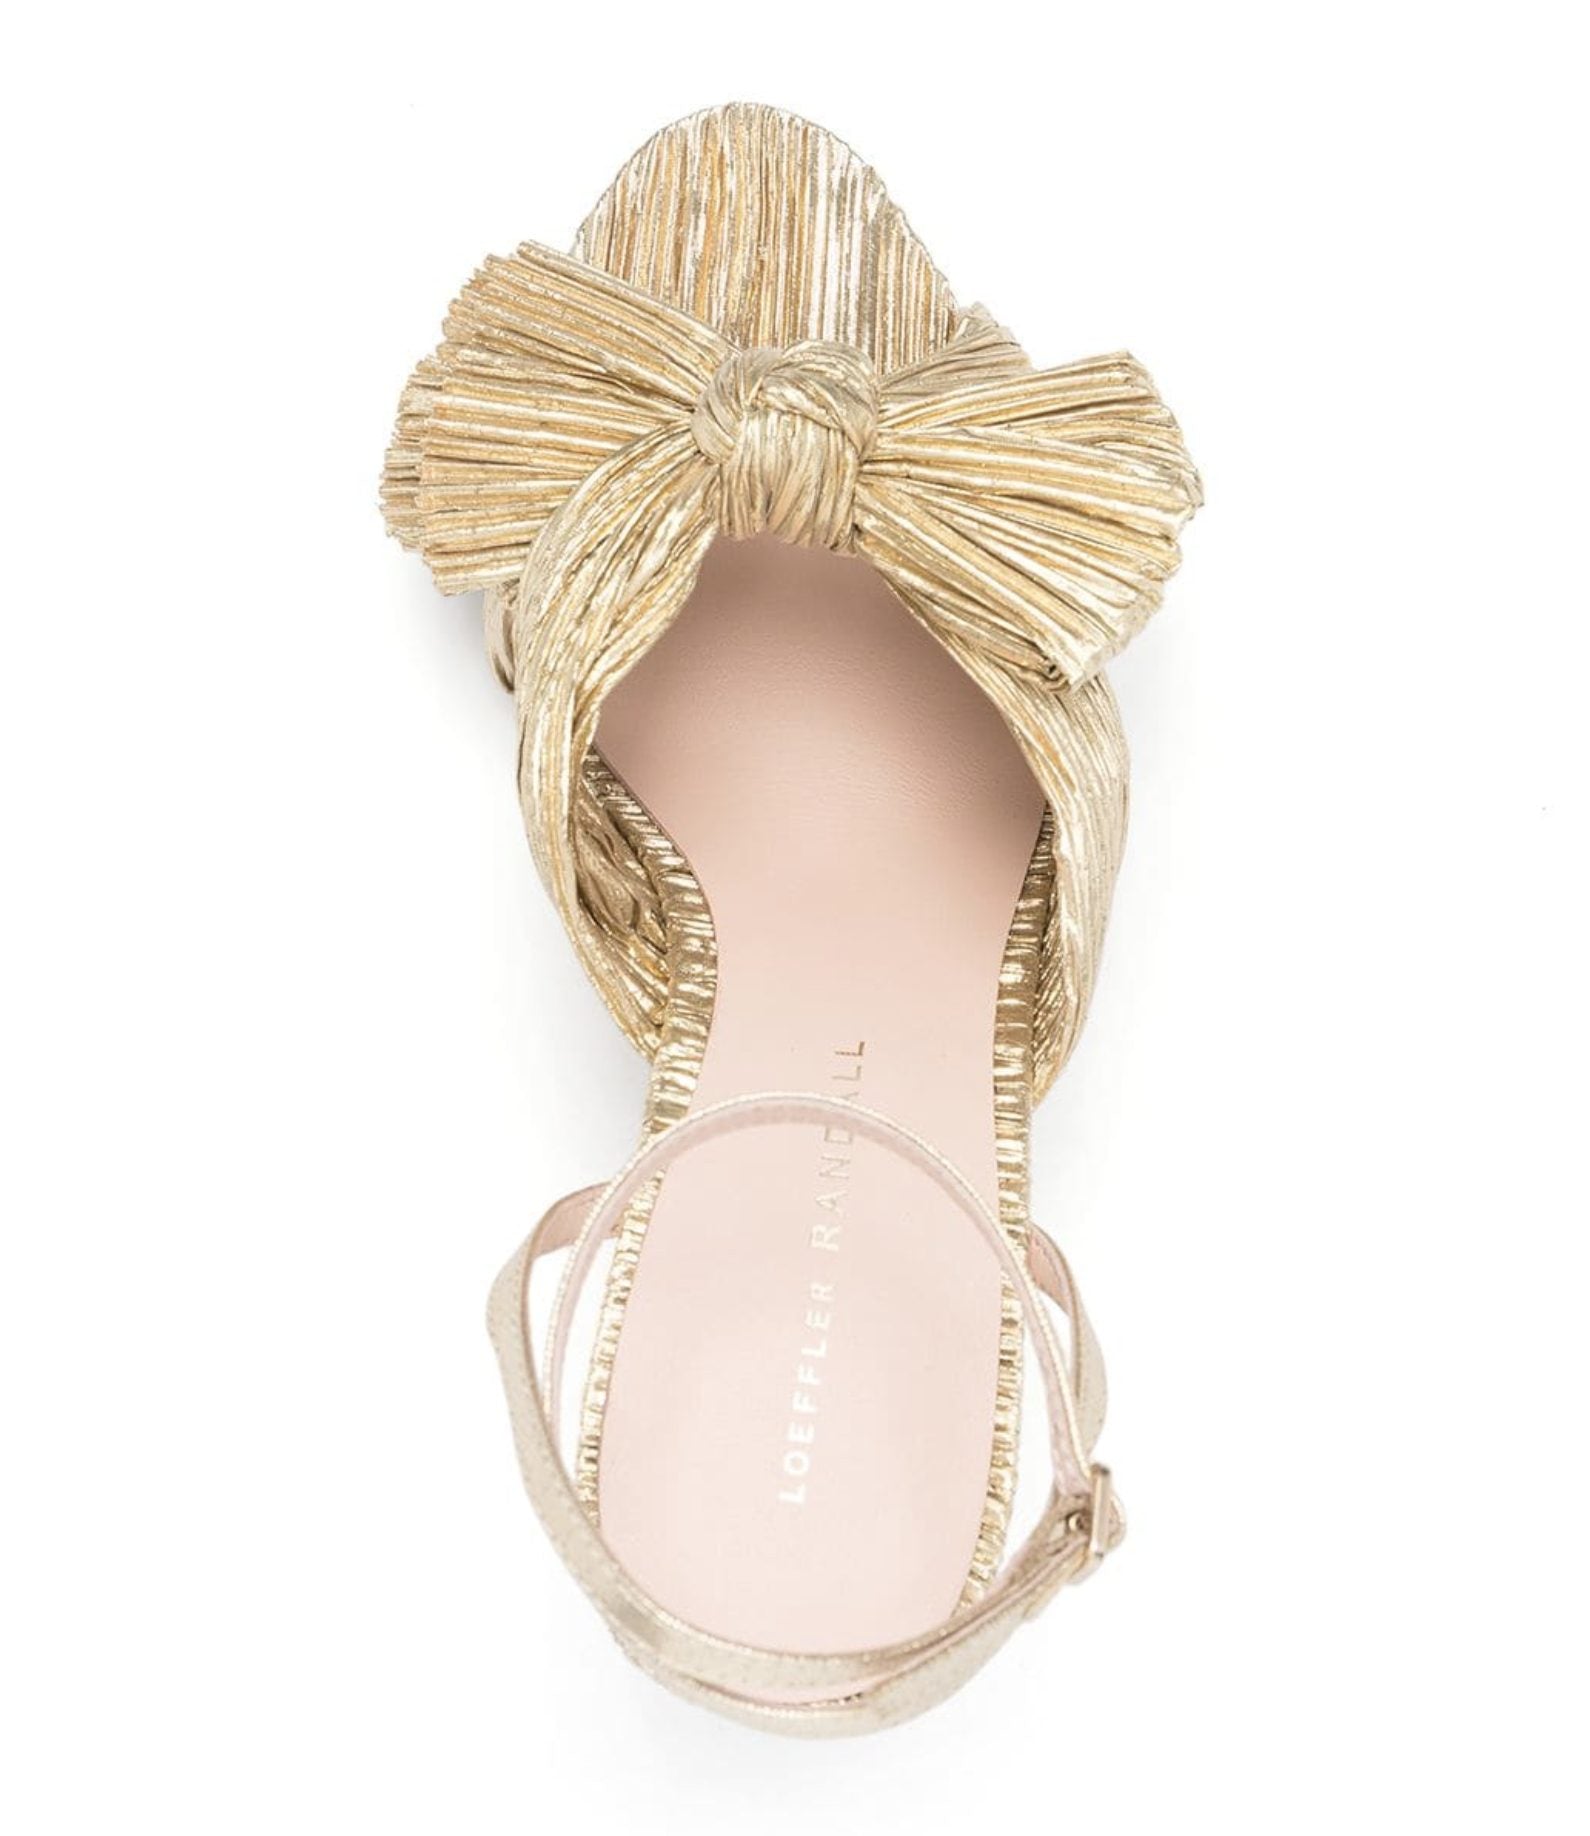 Camellia Gold Shoes by Loeffler Randall